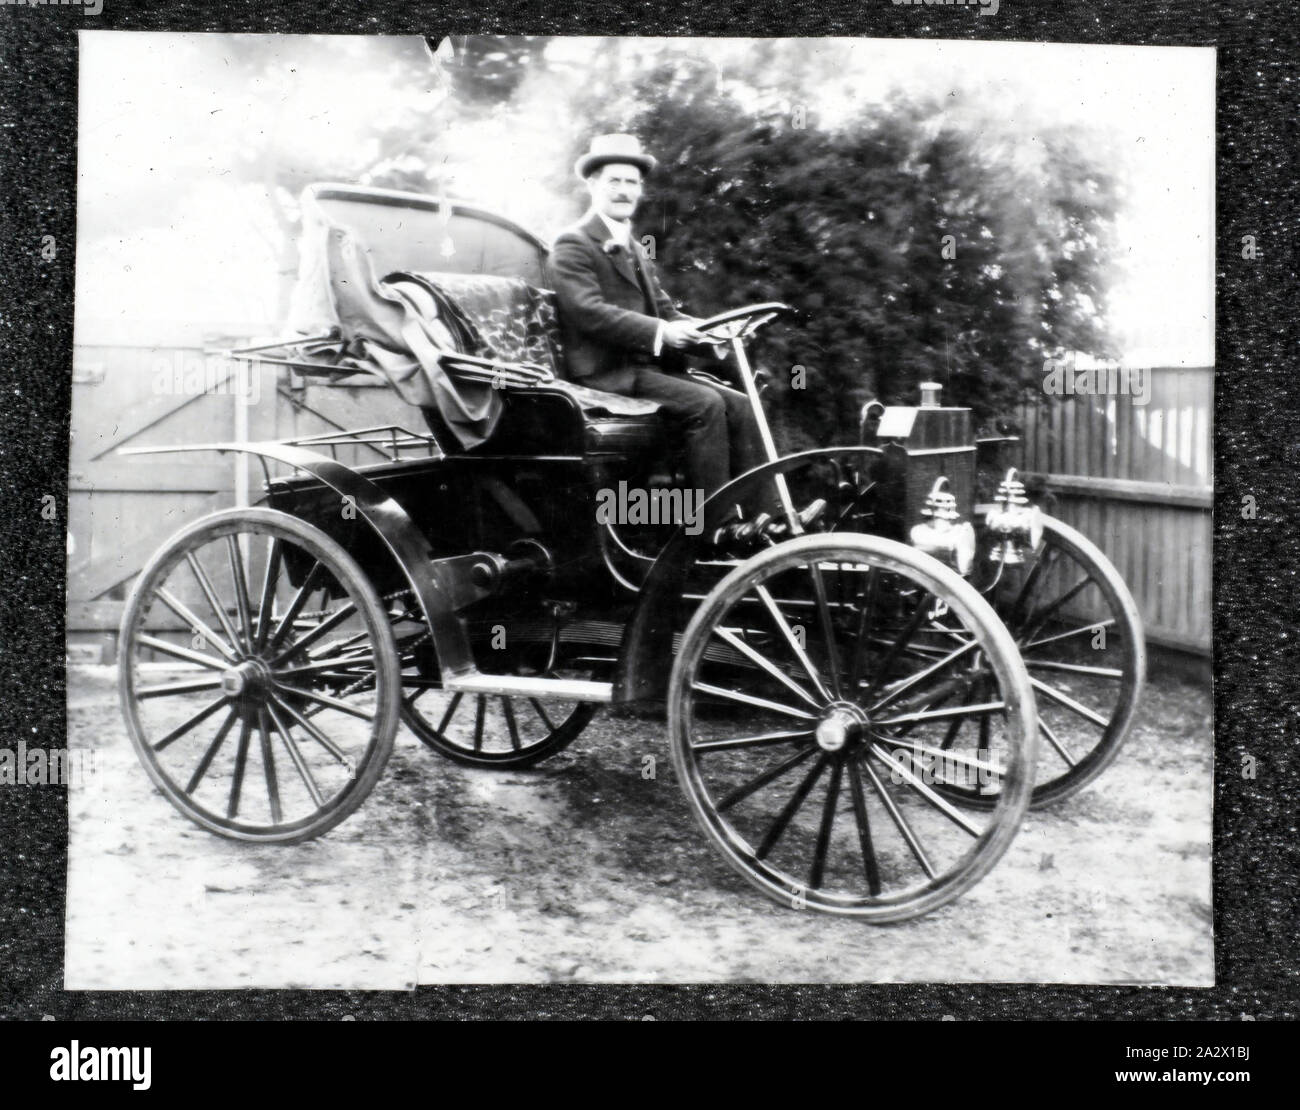 Negative - Thomas M. Arthur & Schacht Motor Buggy, Melbourne, Victoria, circa 1908-1909, Black and white negative of Mr Thomas Montgomery Arthur sitting in a motor buggy, circa 1908-1909. Mr Thomas Montgomery Arthur was a commercial traveler for Henry Berry (Grocers) in Melbourne. The Schacht company produced this type of motor buggy in Cincinnati, Ohio, USA between 1905 and 1909. This image is part of a collection of photographs, negatives and slides used for research by curators at Stock Photo